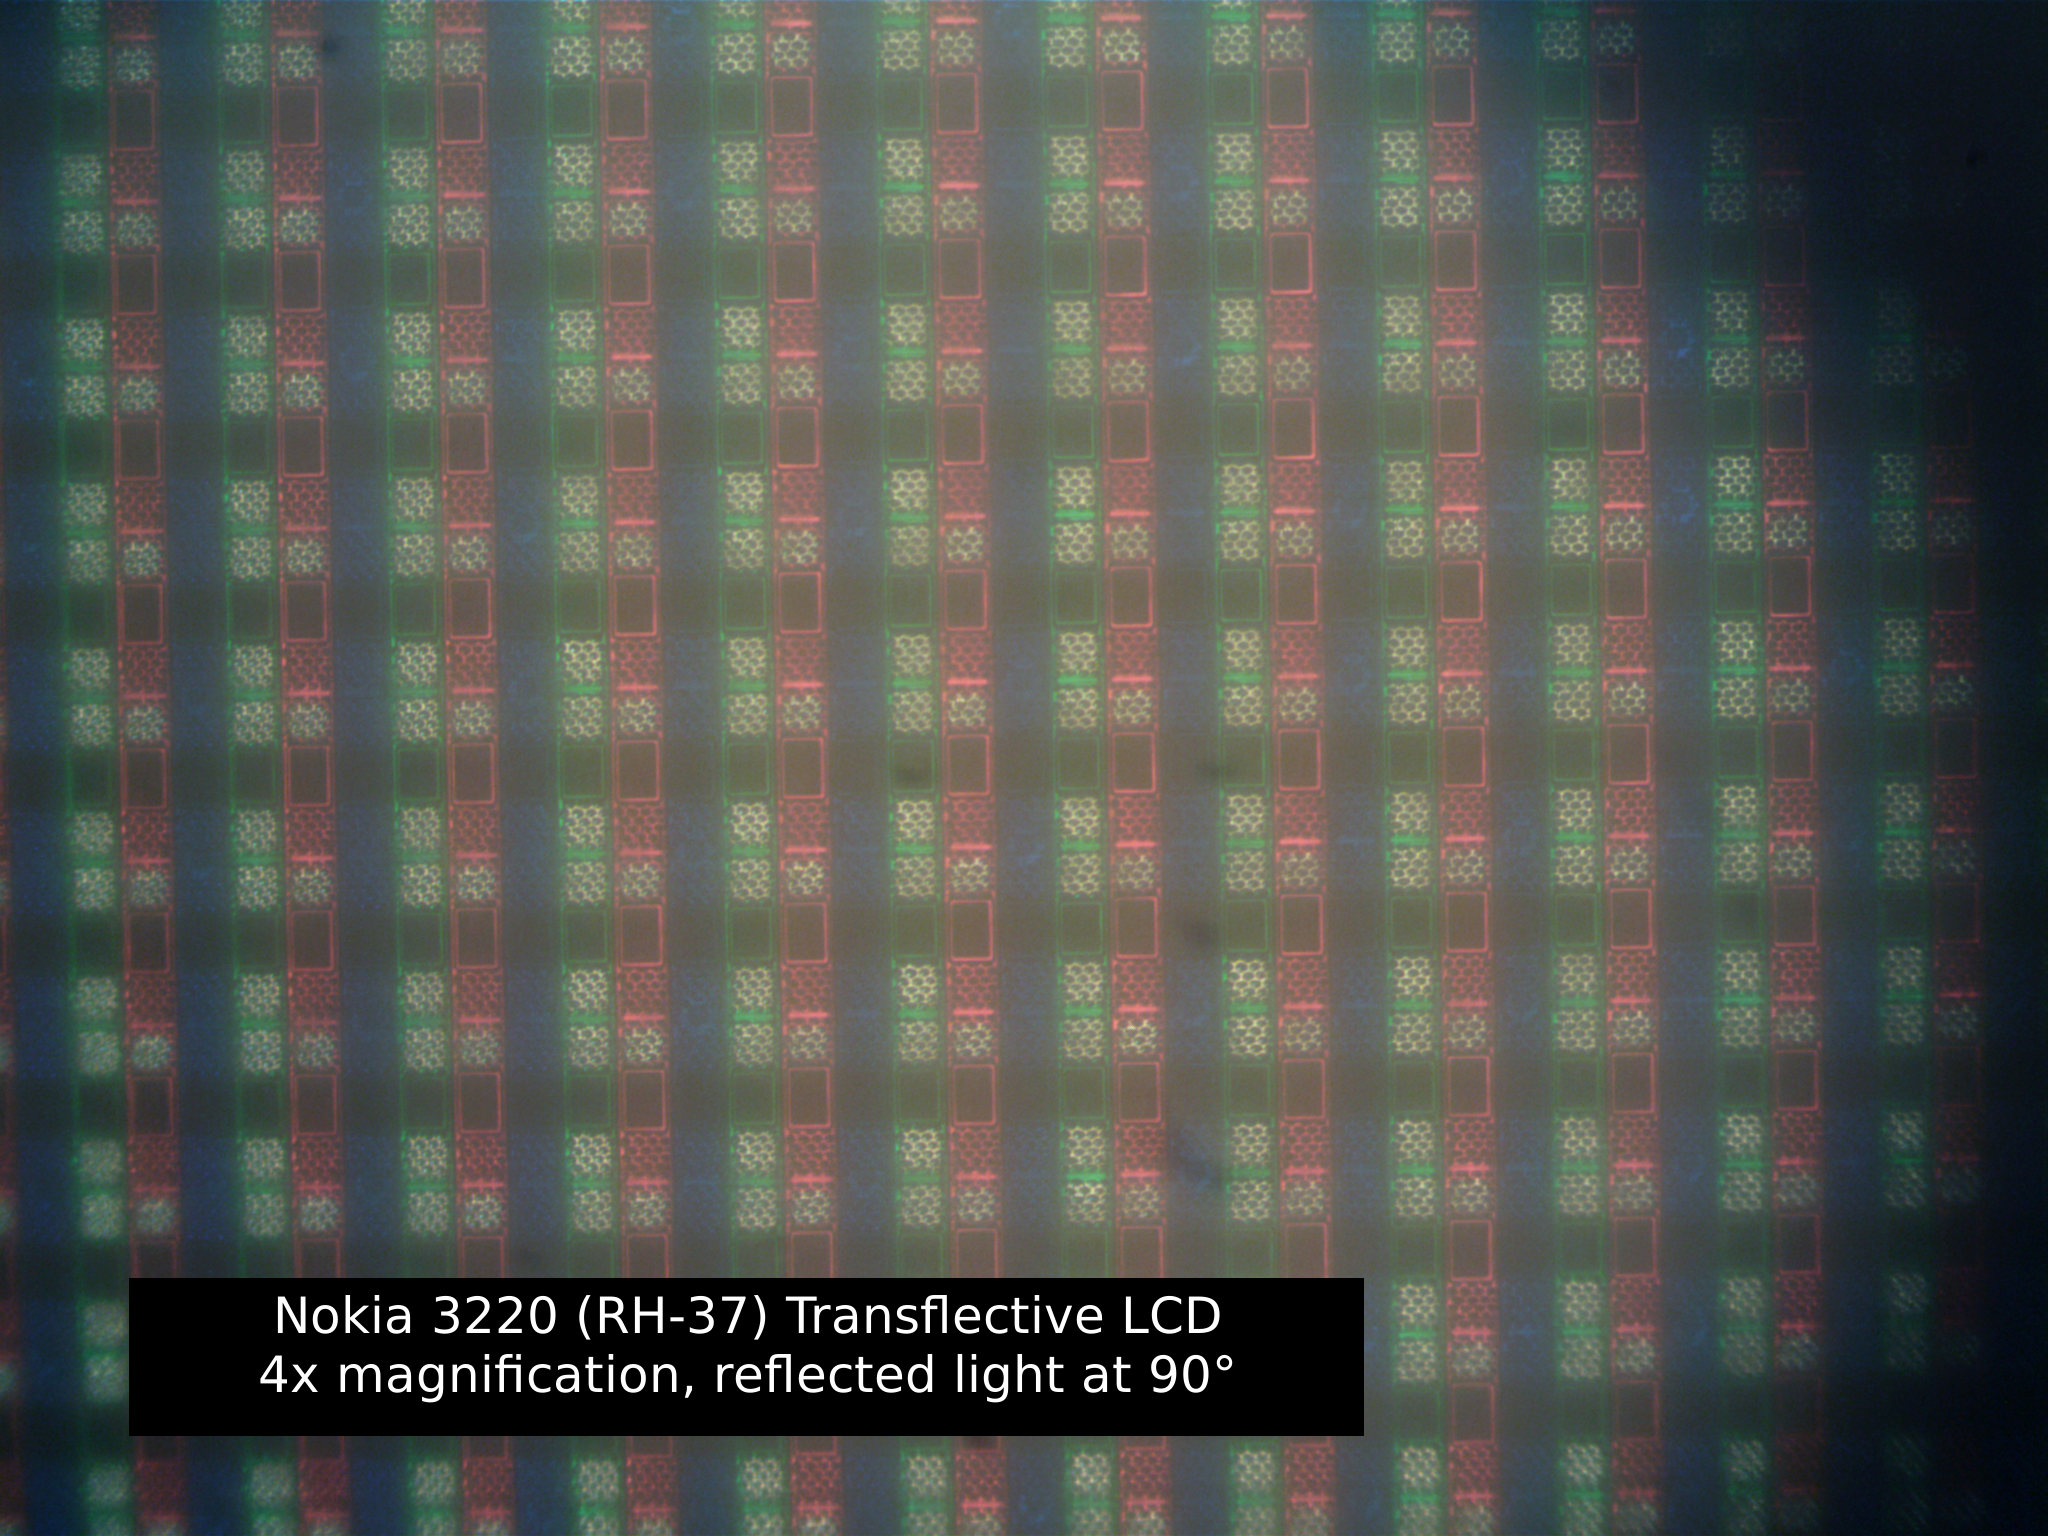 reflected light incident at 90°